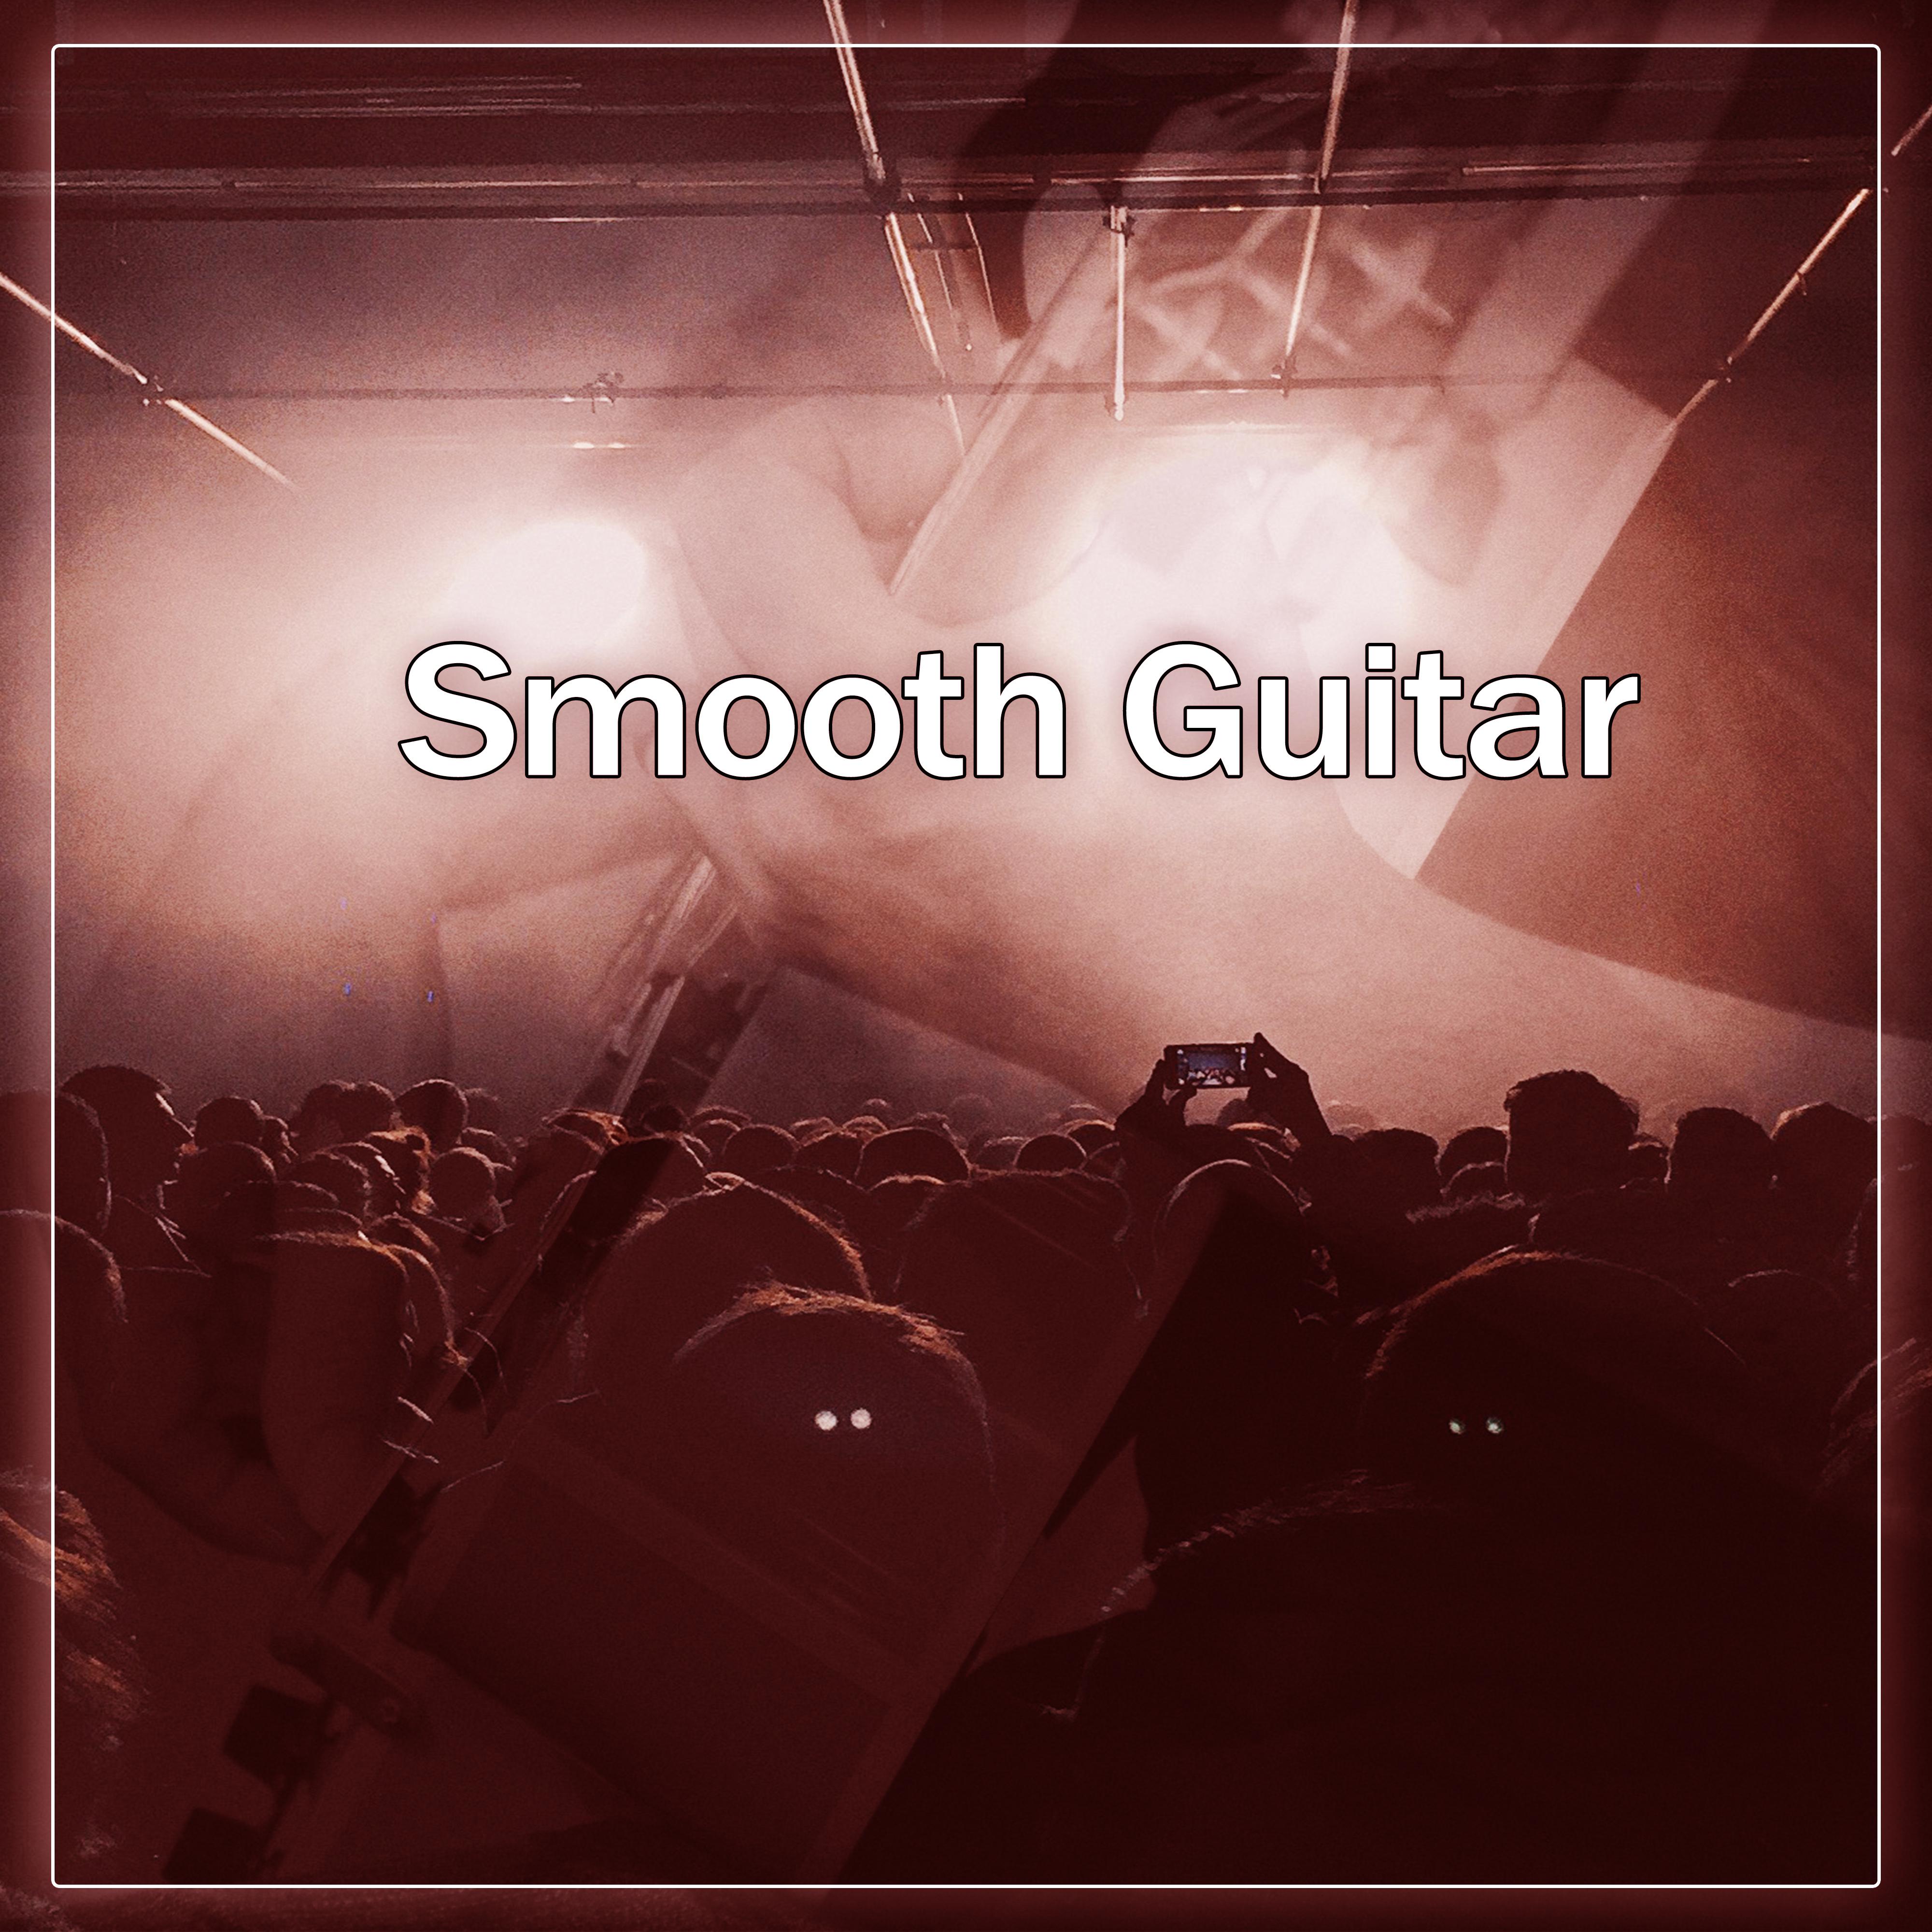 Smooth Guitar  Night Guitar, Restaurant Music, Cafe Lounge, Background Sounds, Best Smooth Jazz